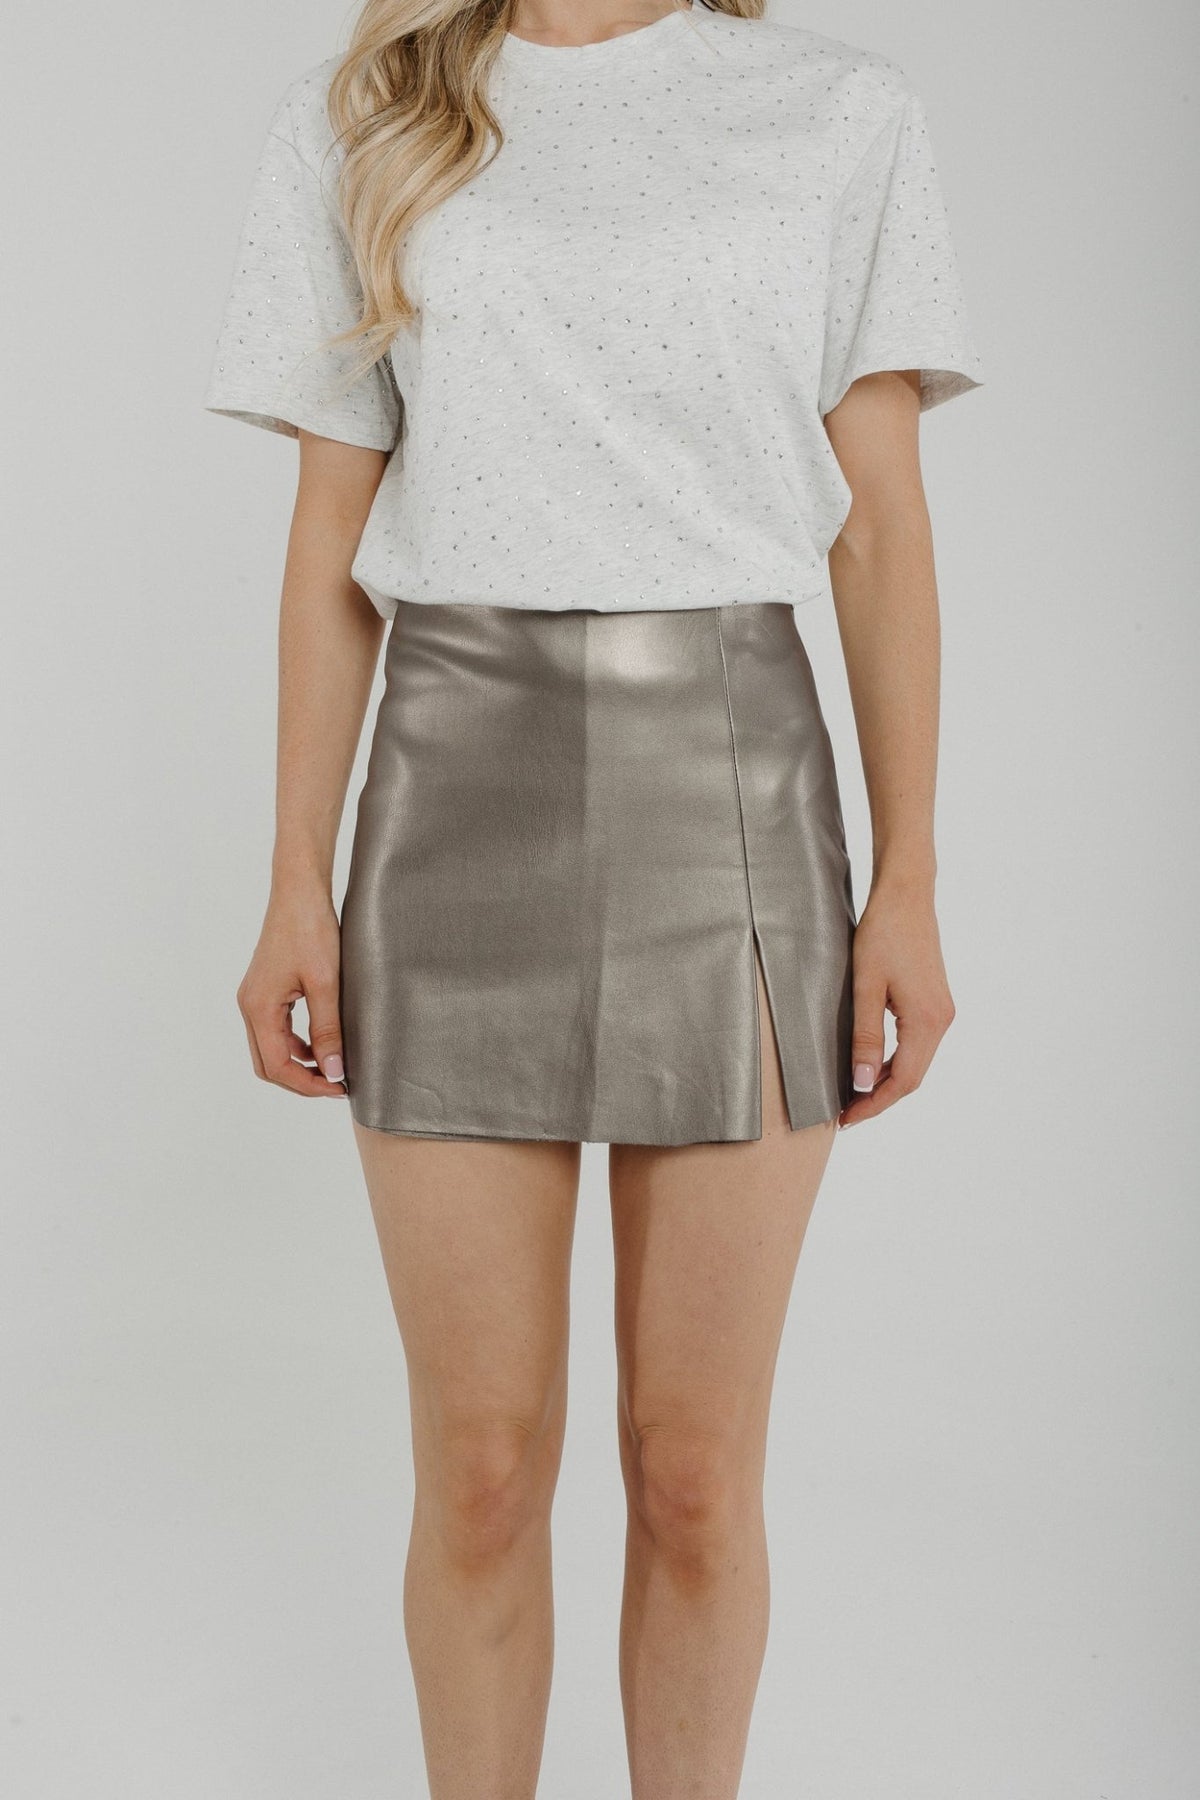 Cindy Faux Leather Skort In Pewter - The Walk in Wardrobe